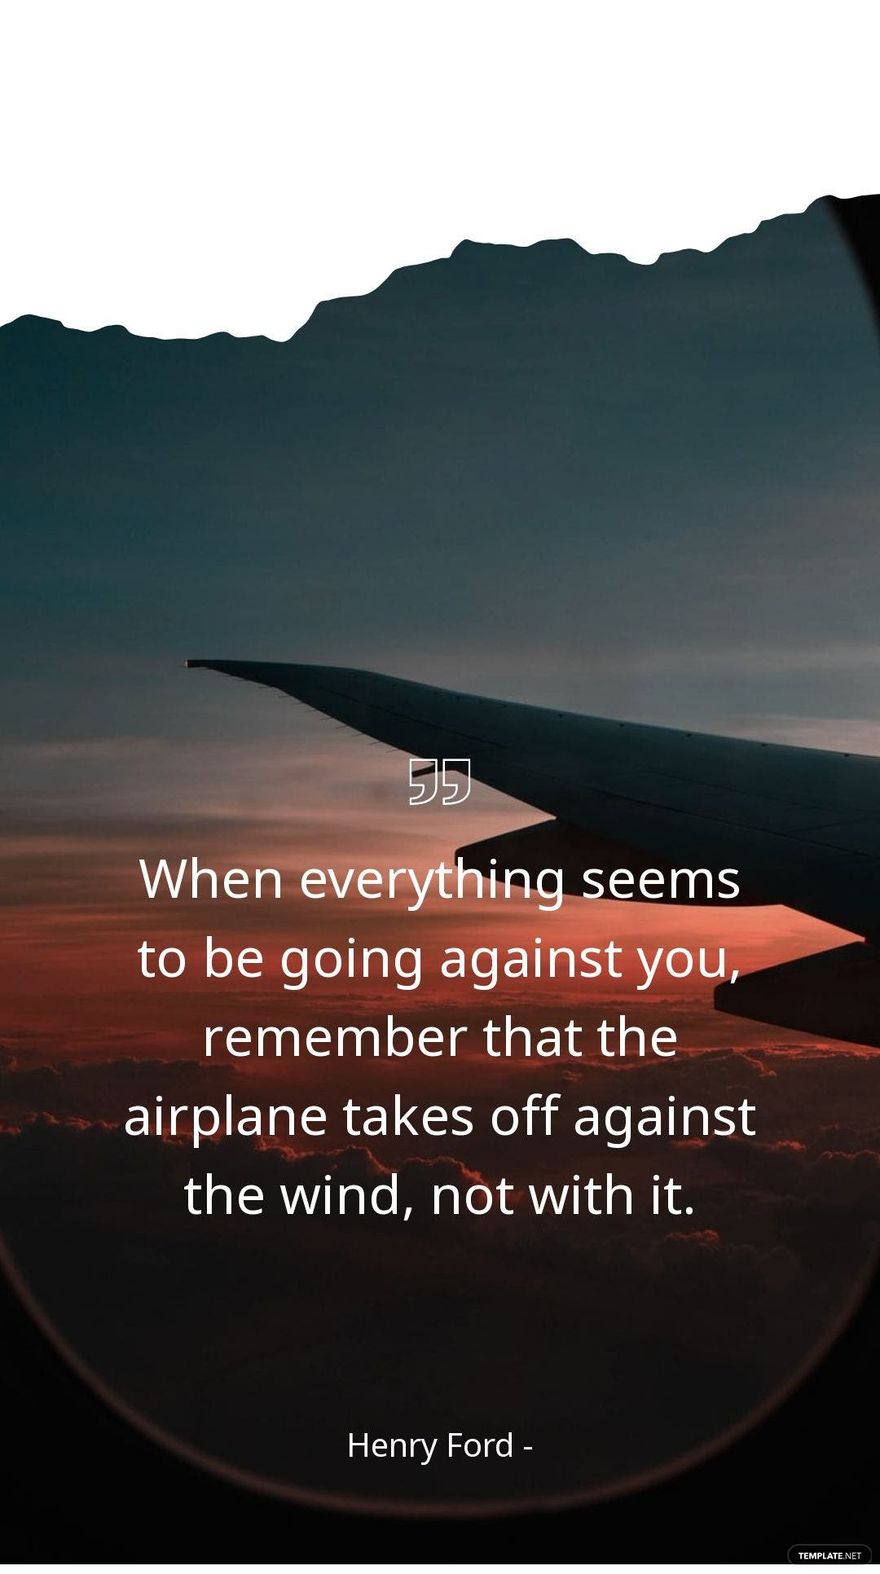 Henry Ford - When everything seems to be going against you, remember that the airplane takes off against the wind, not with it.